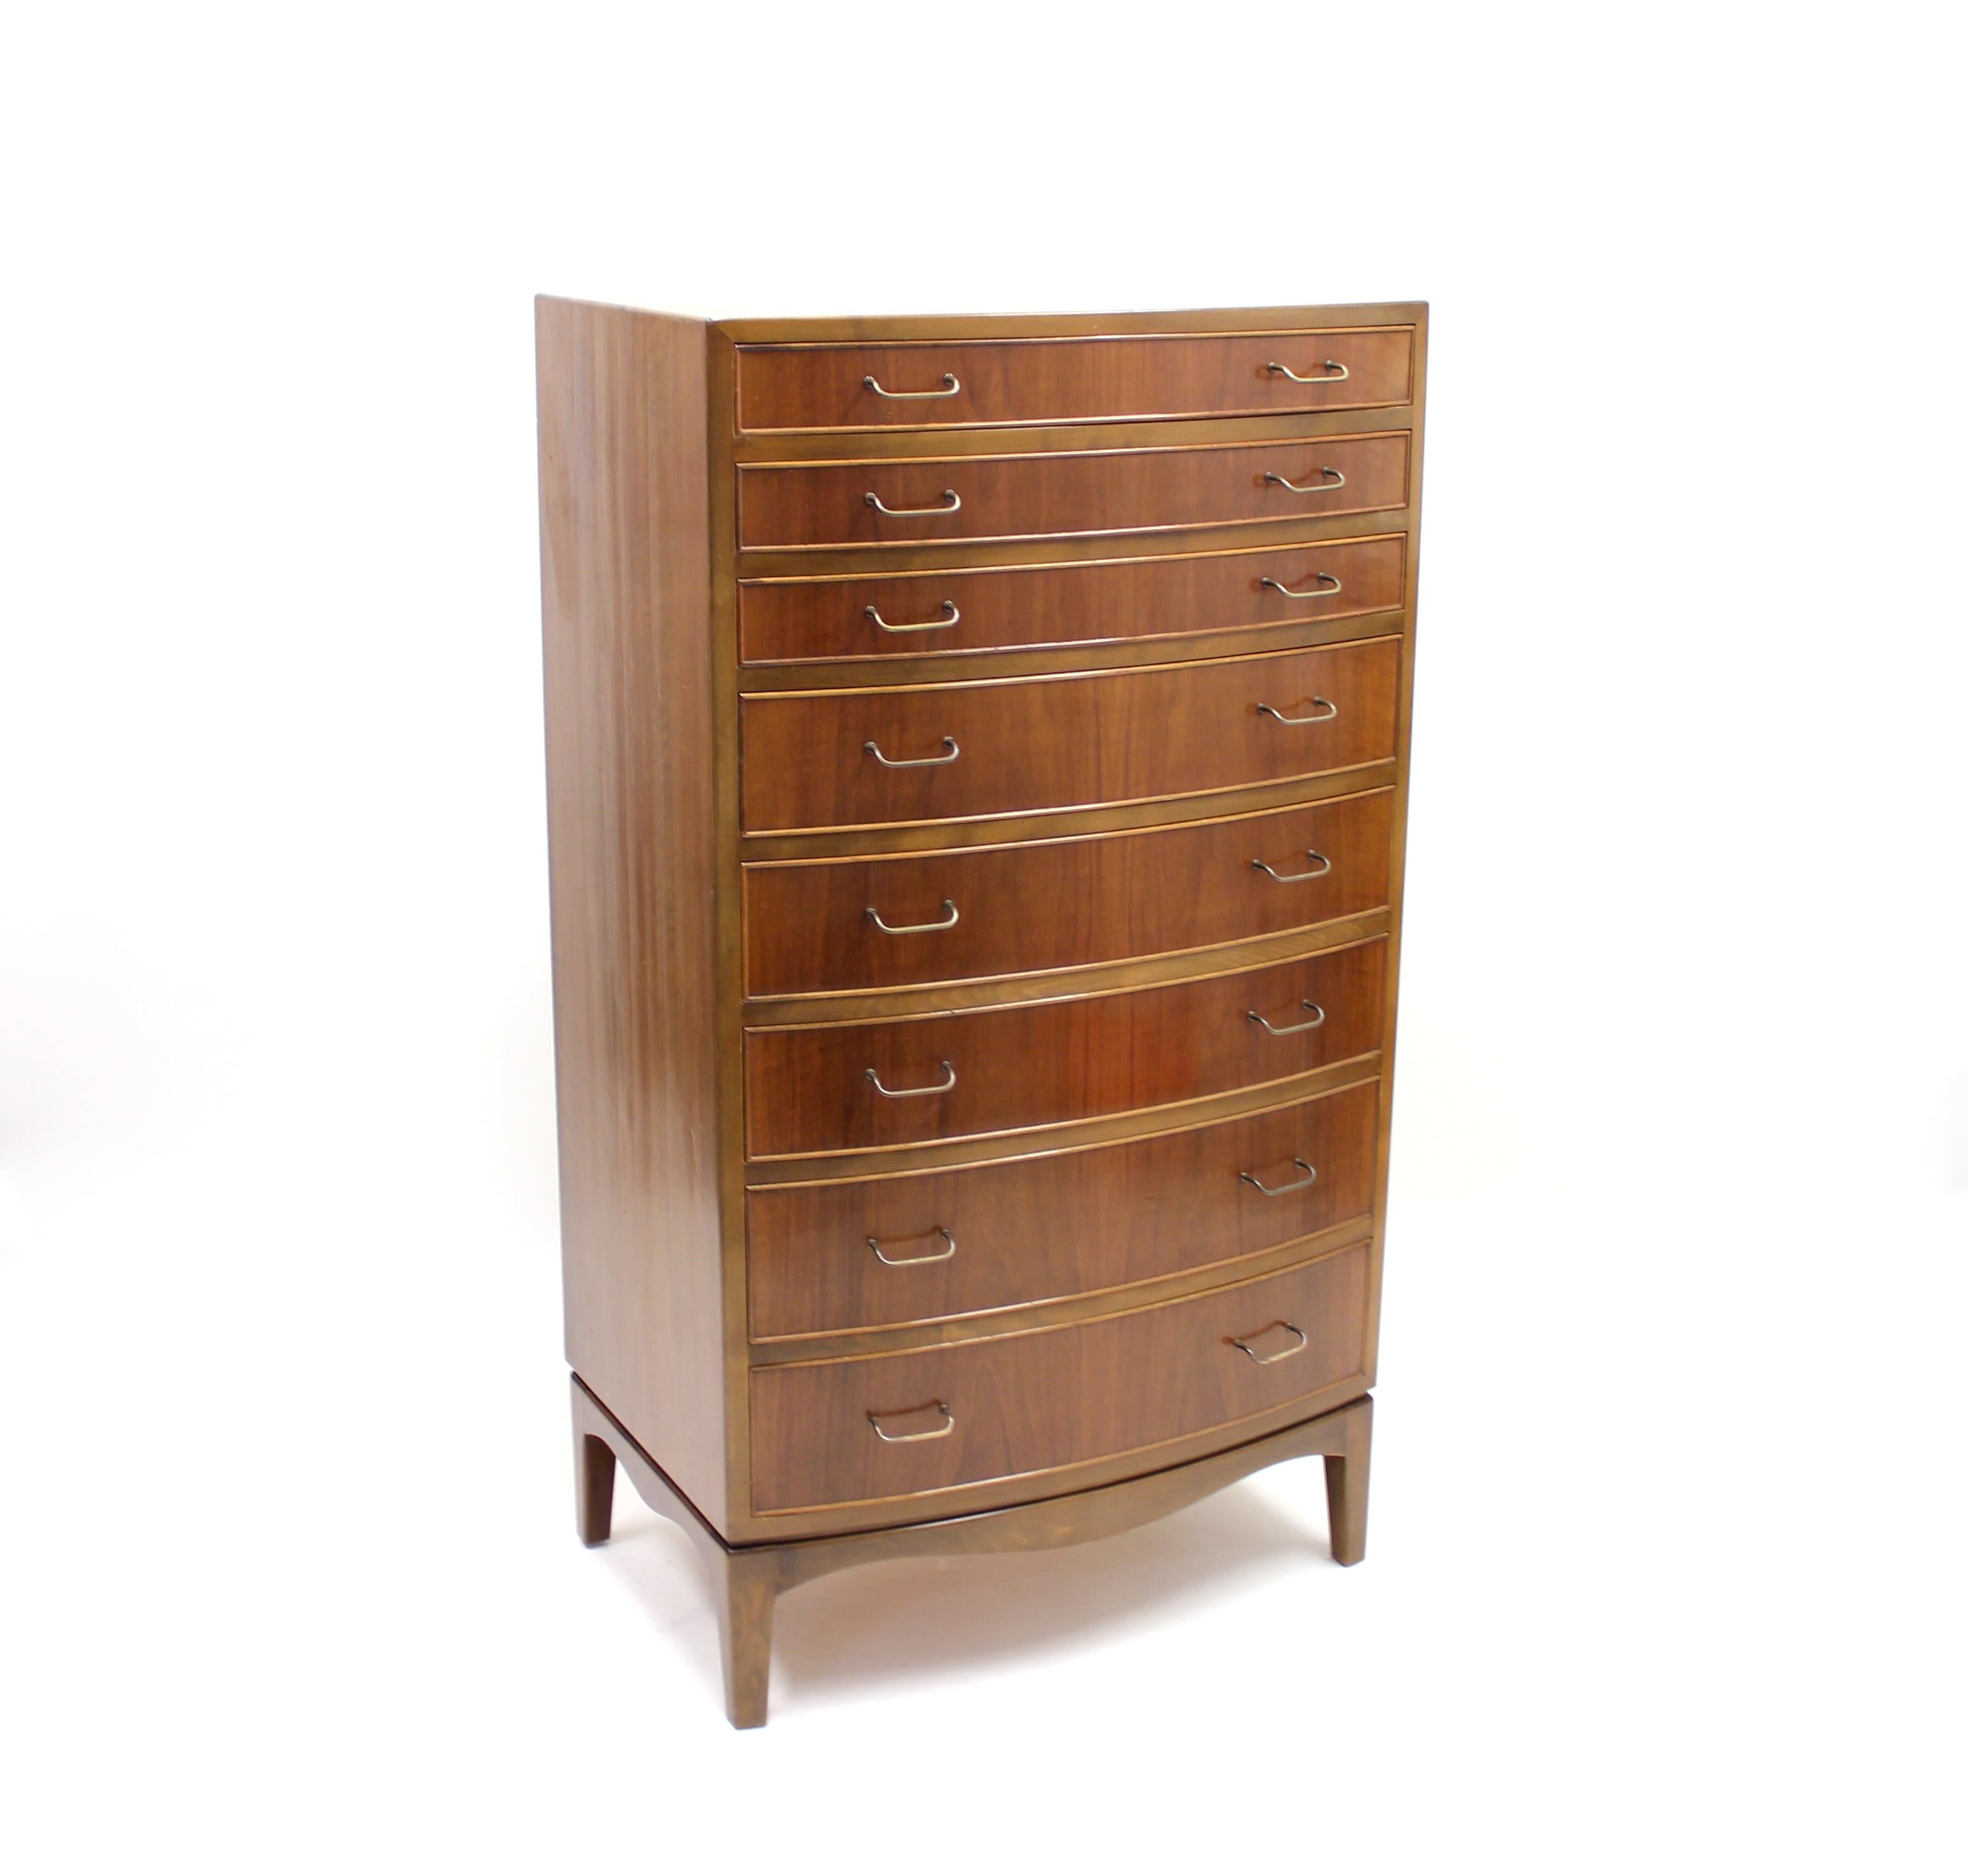 Chest of drawers or tall boy with curved front and eight drawers designed by Ole Wanscher for A.J. Iversen in the 1940s. Made of walnut and red beech with metal handles. Very good condition.